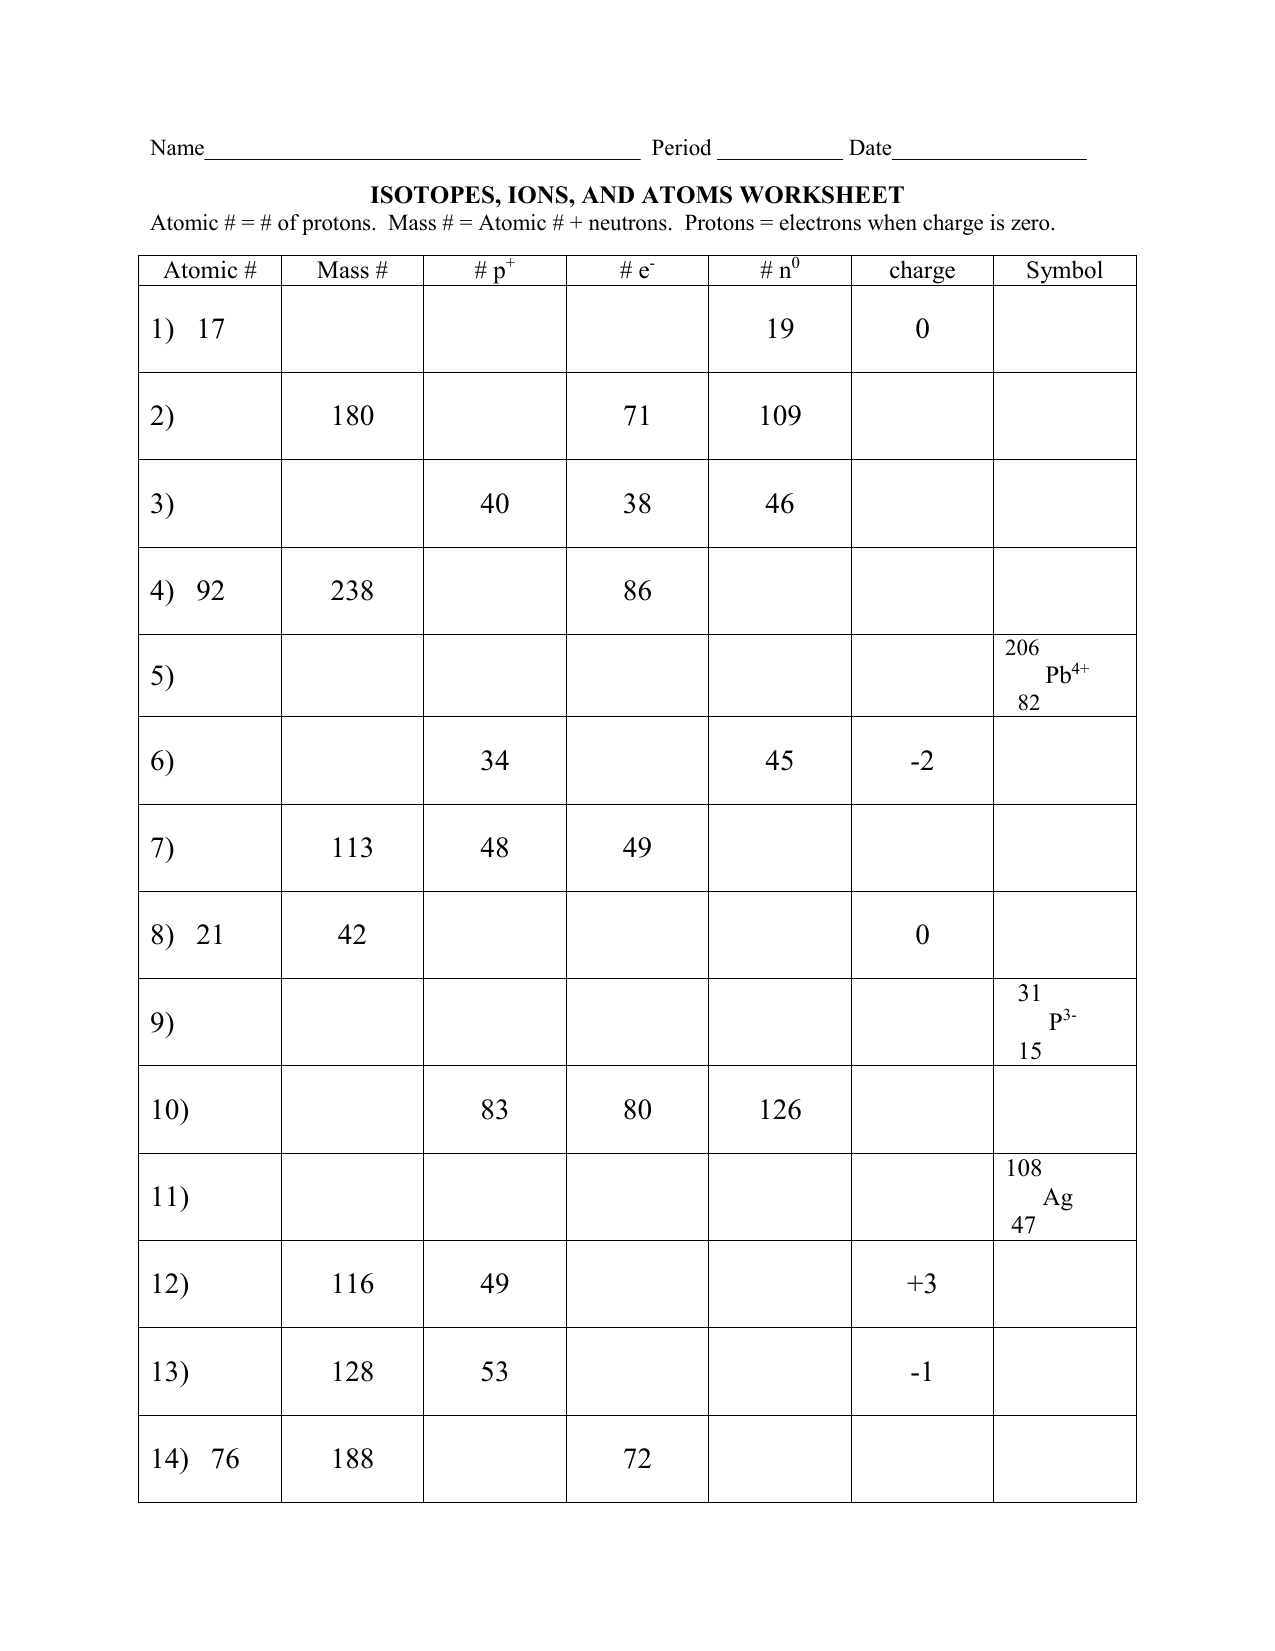 Isotopes Ions and Atoms WS Inside Isotopes Ions And Atoms Worksheet